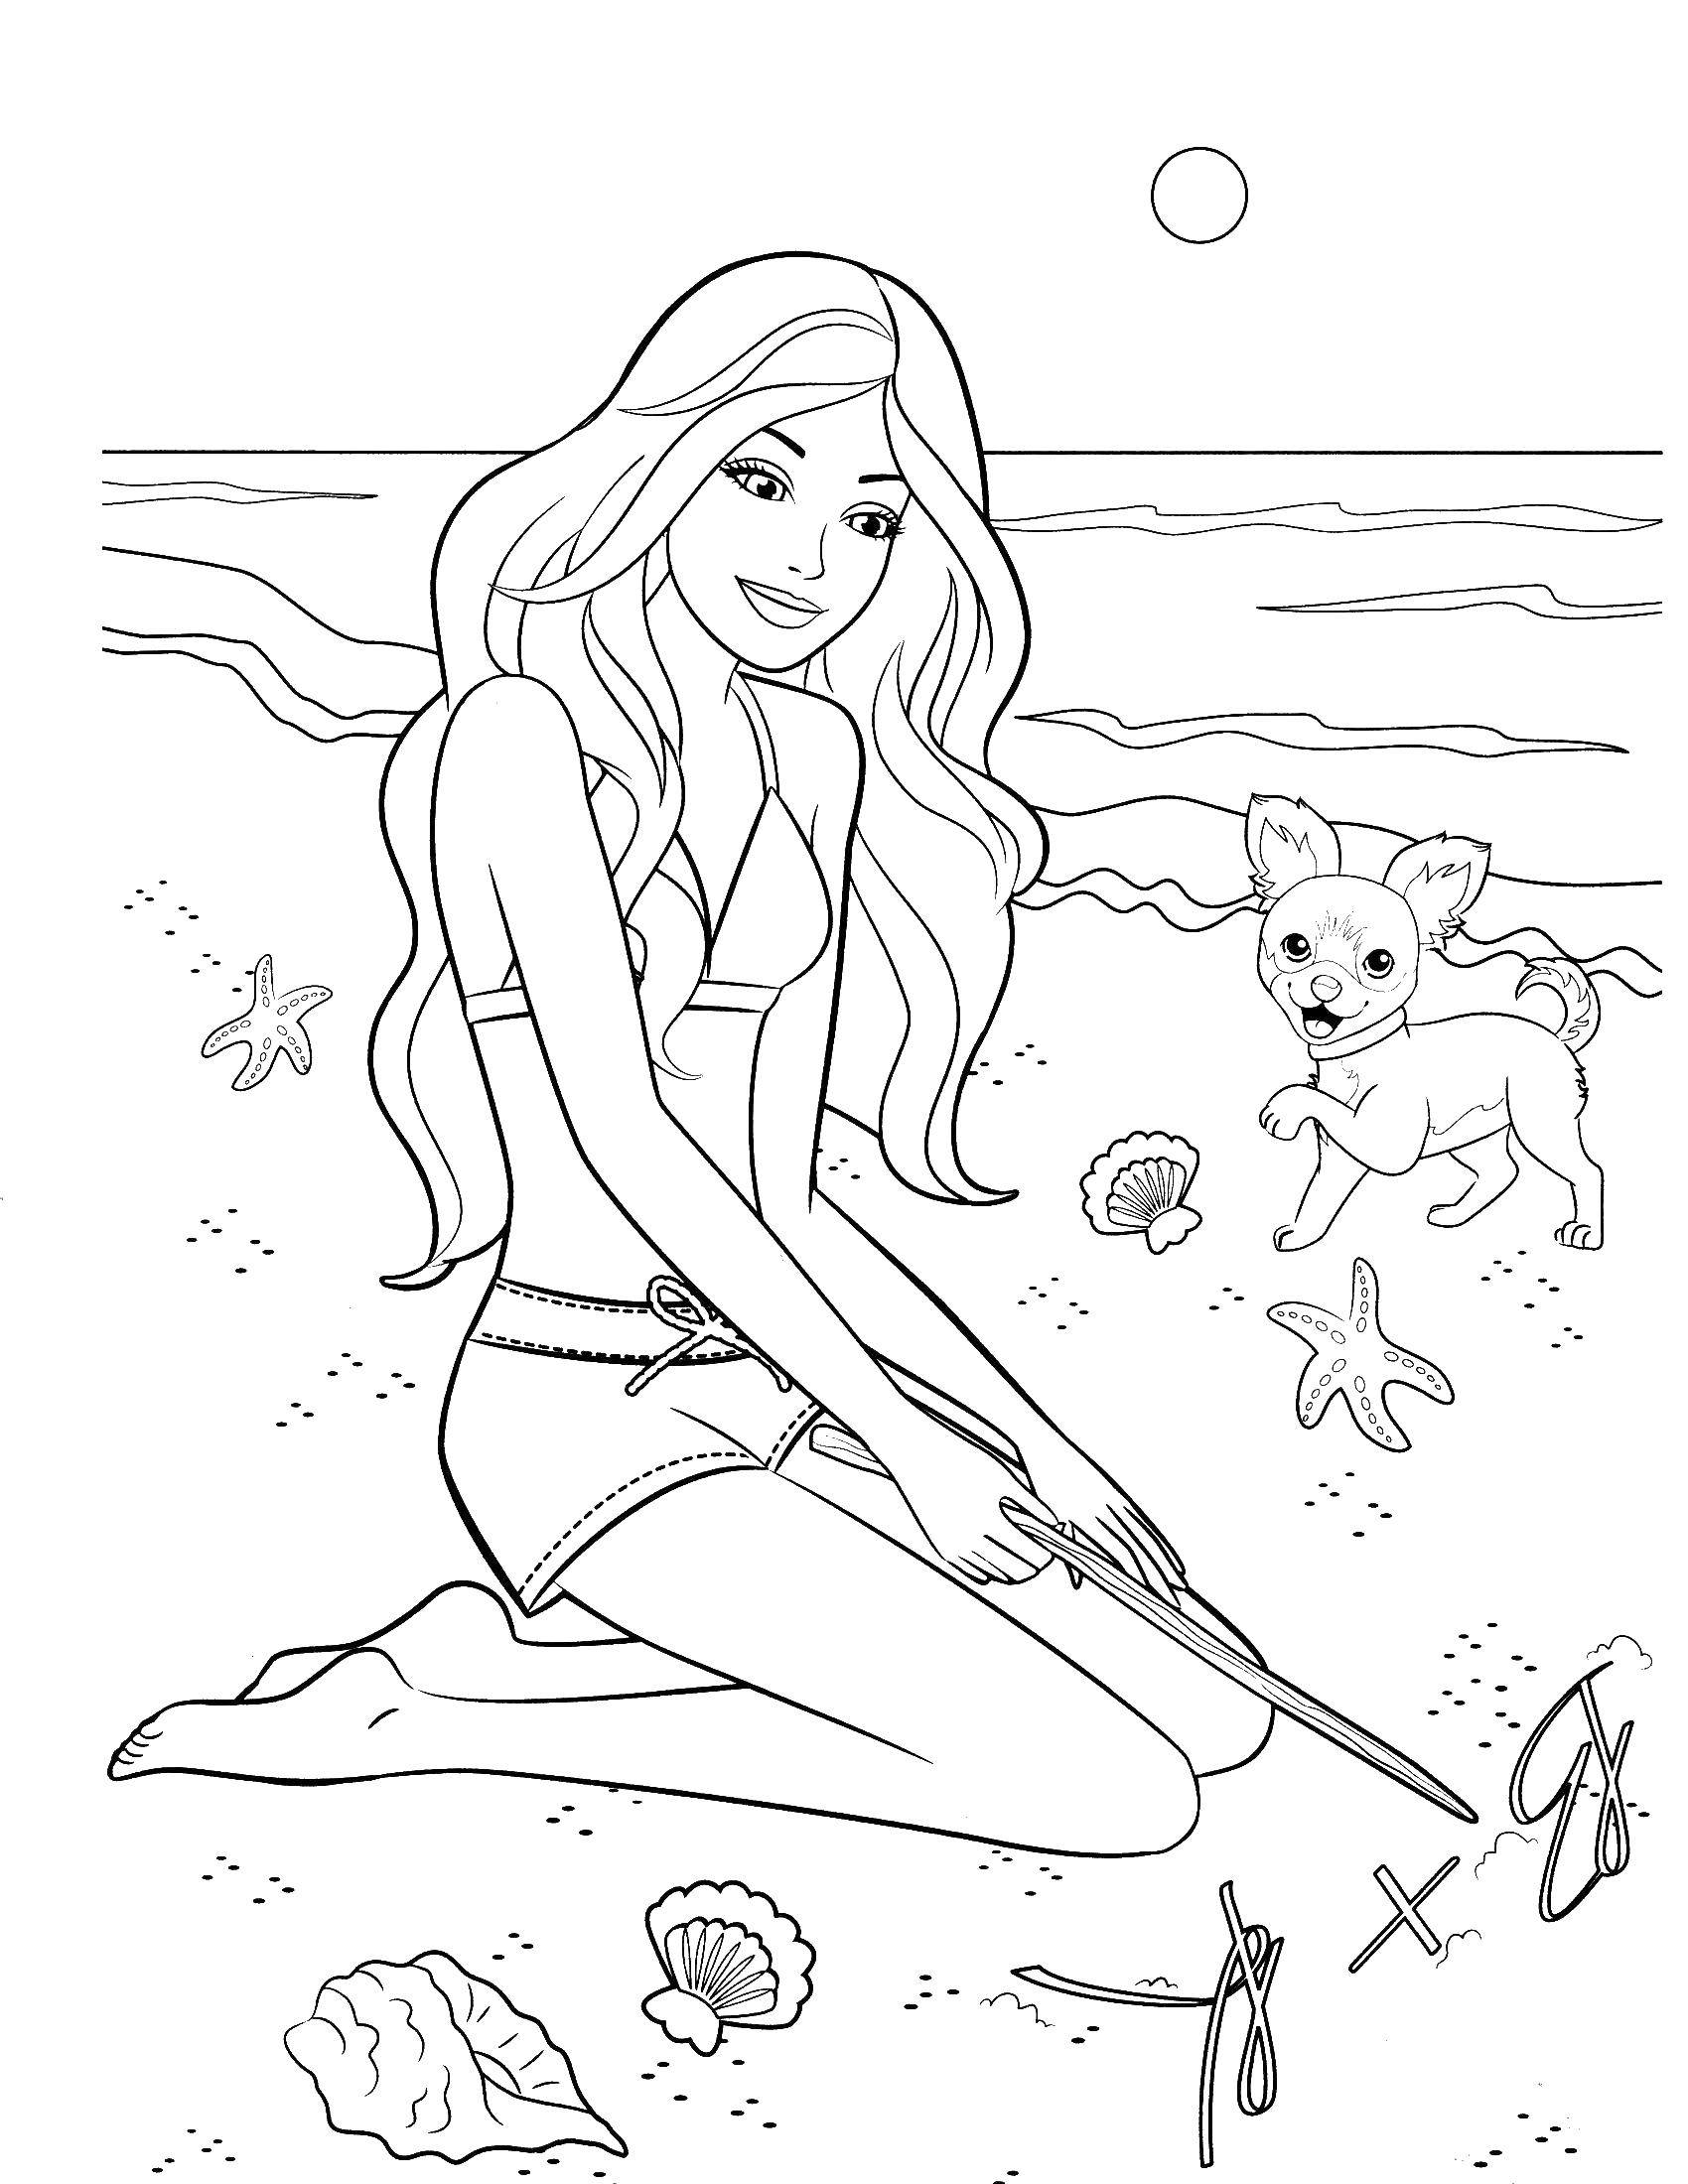 Coloring Girl on beach with a dog. Category Beach. Tags:  girl, doggy, shells.